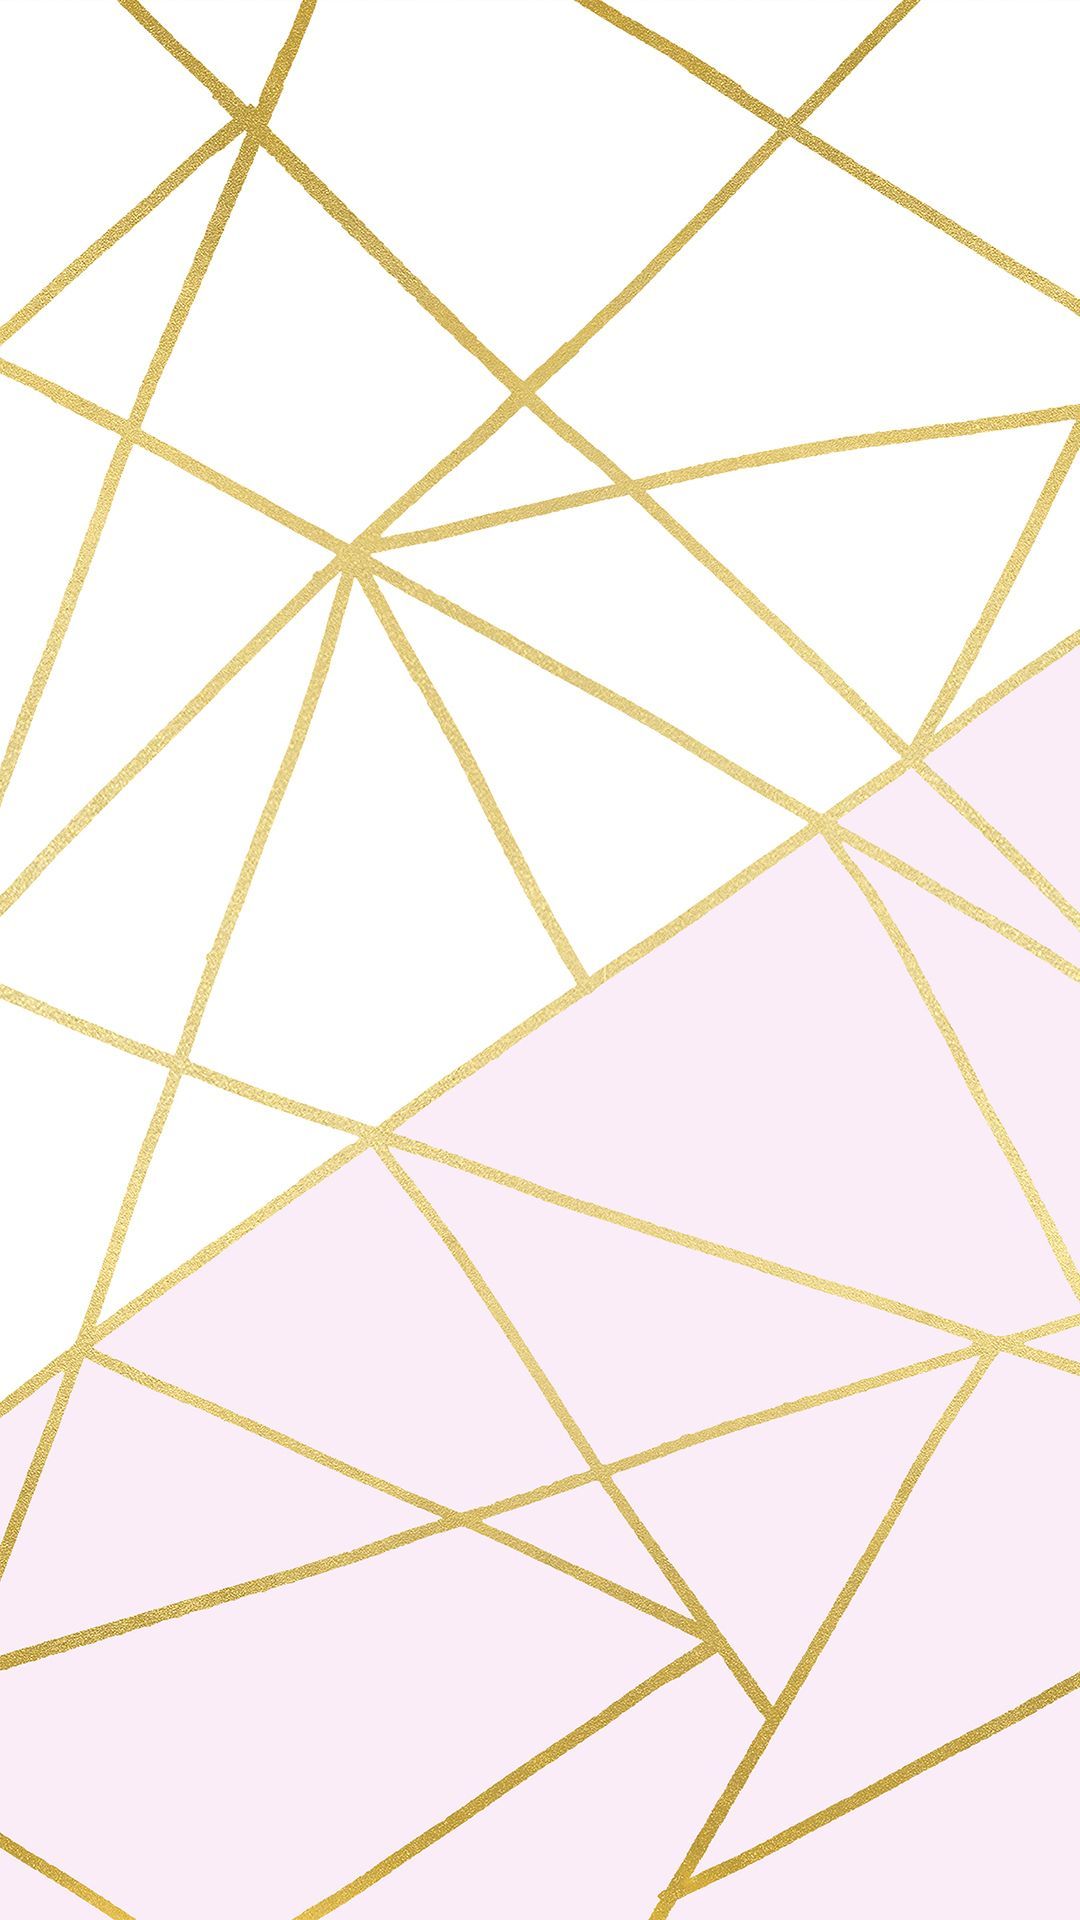 Gold And White Geometric Wallpapers - Wallpaper Cave